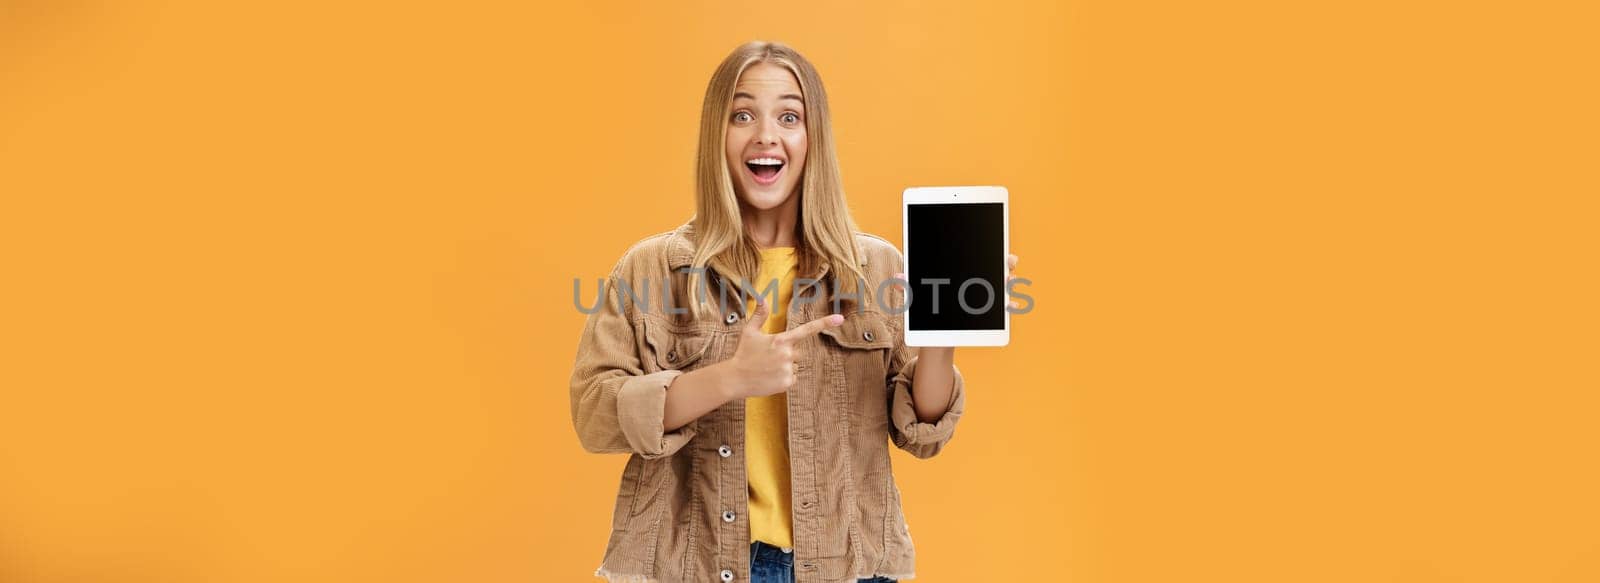 Woman showing friends new digital tablet first purchace of autumn. Charismatic and enthusiastic excited caucasian female with tanned skin and fair hair in corduroy jacket pointing at gadget screen. Emotions and technology concept